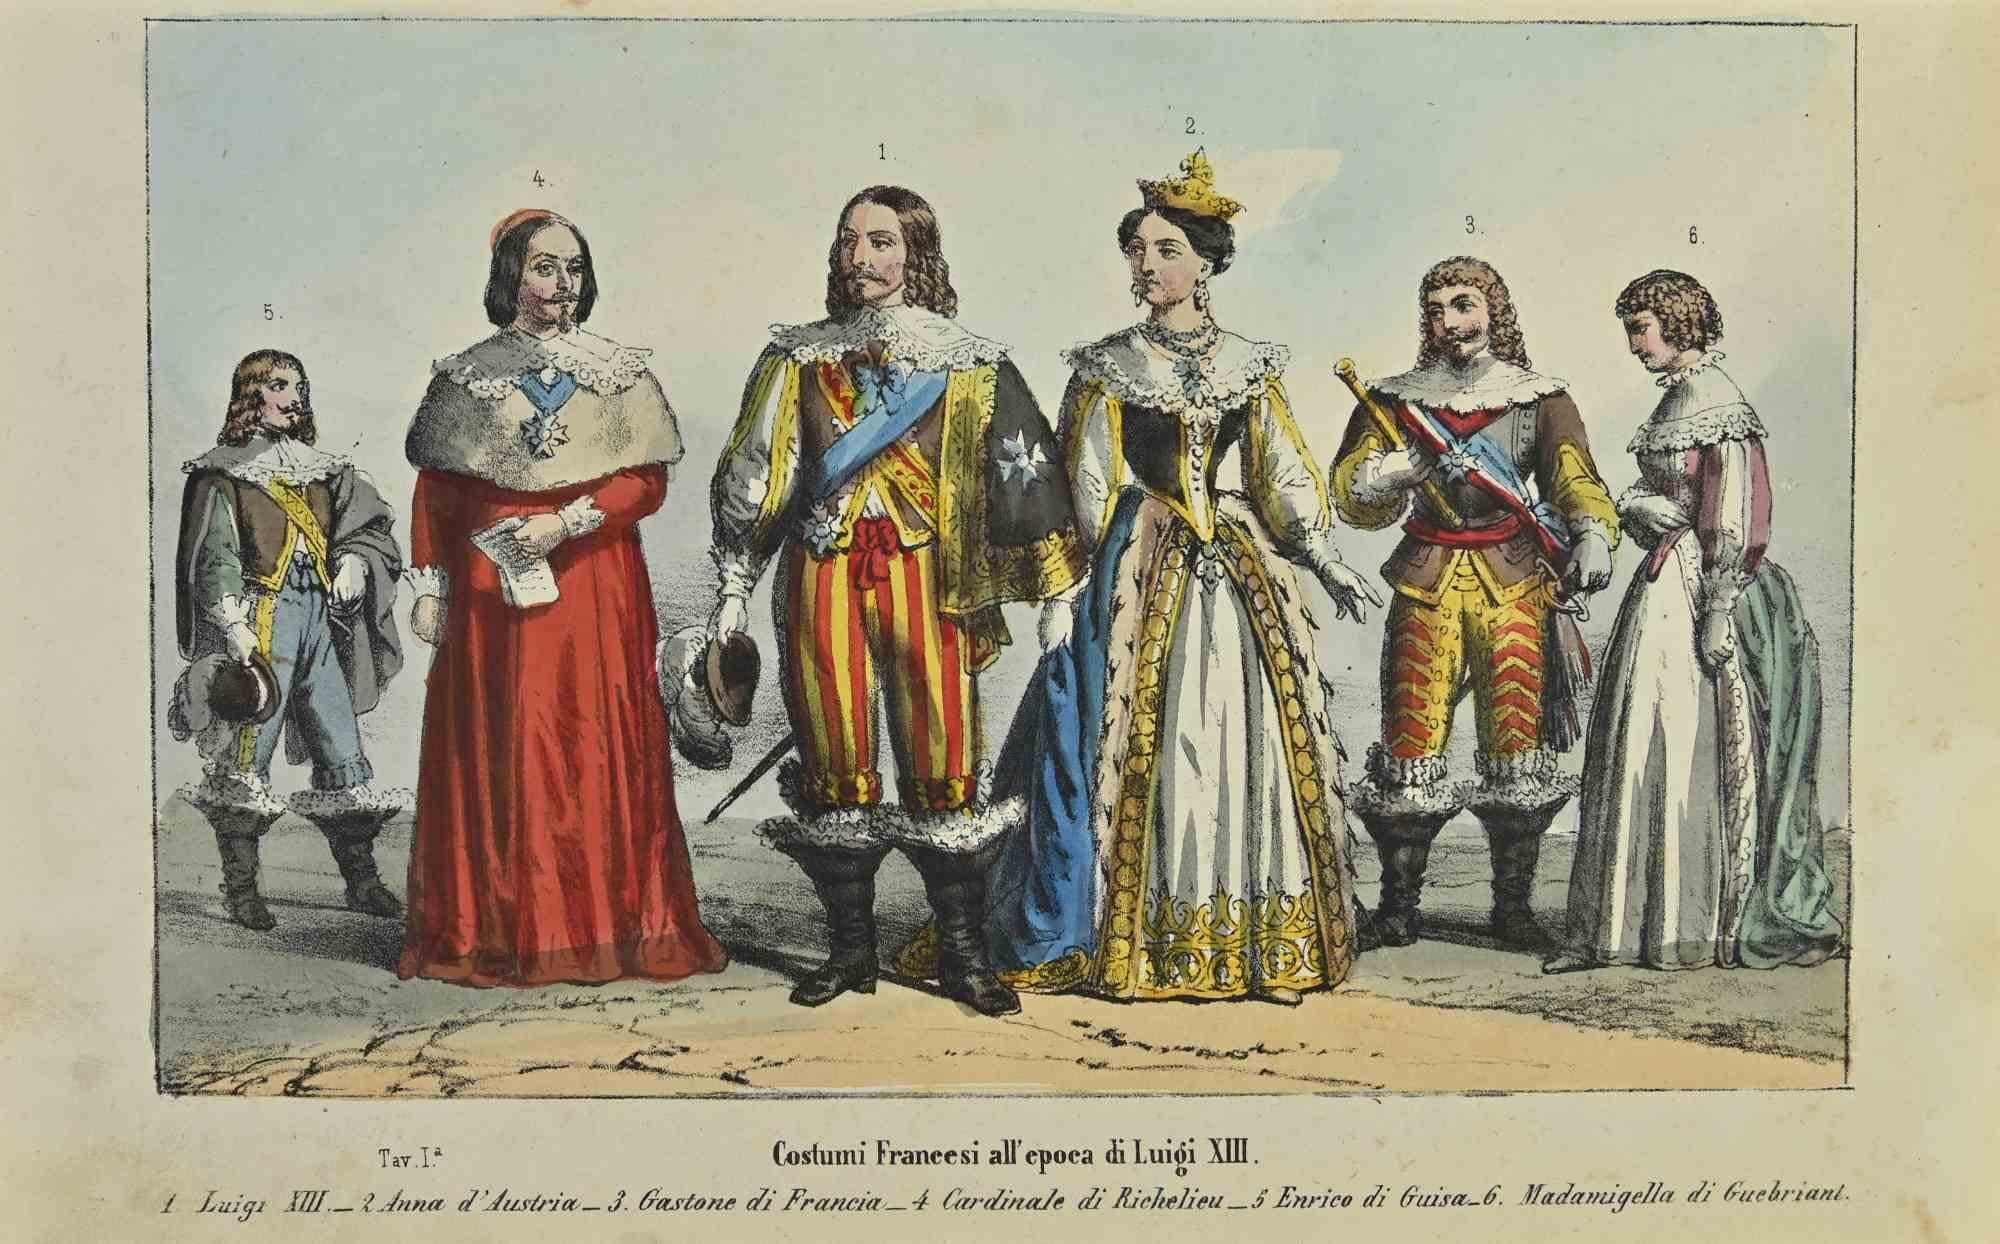 French costumes at the time of Louis XIII is a lithograph made by Auguste Wahlen in 1844.

Hand colored.

Good condition.

At the center of the artwork is the original title "Costumi Francesi all'epoca di Luigi XIII".

The work is part of Suite